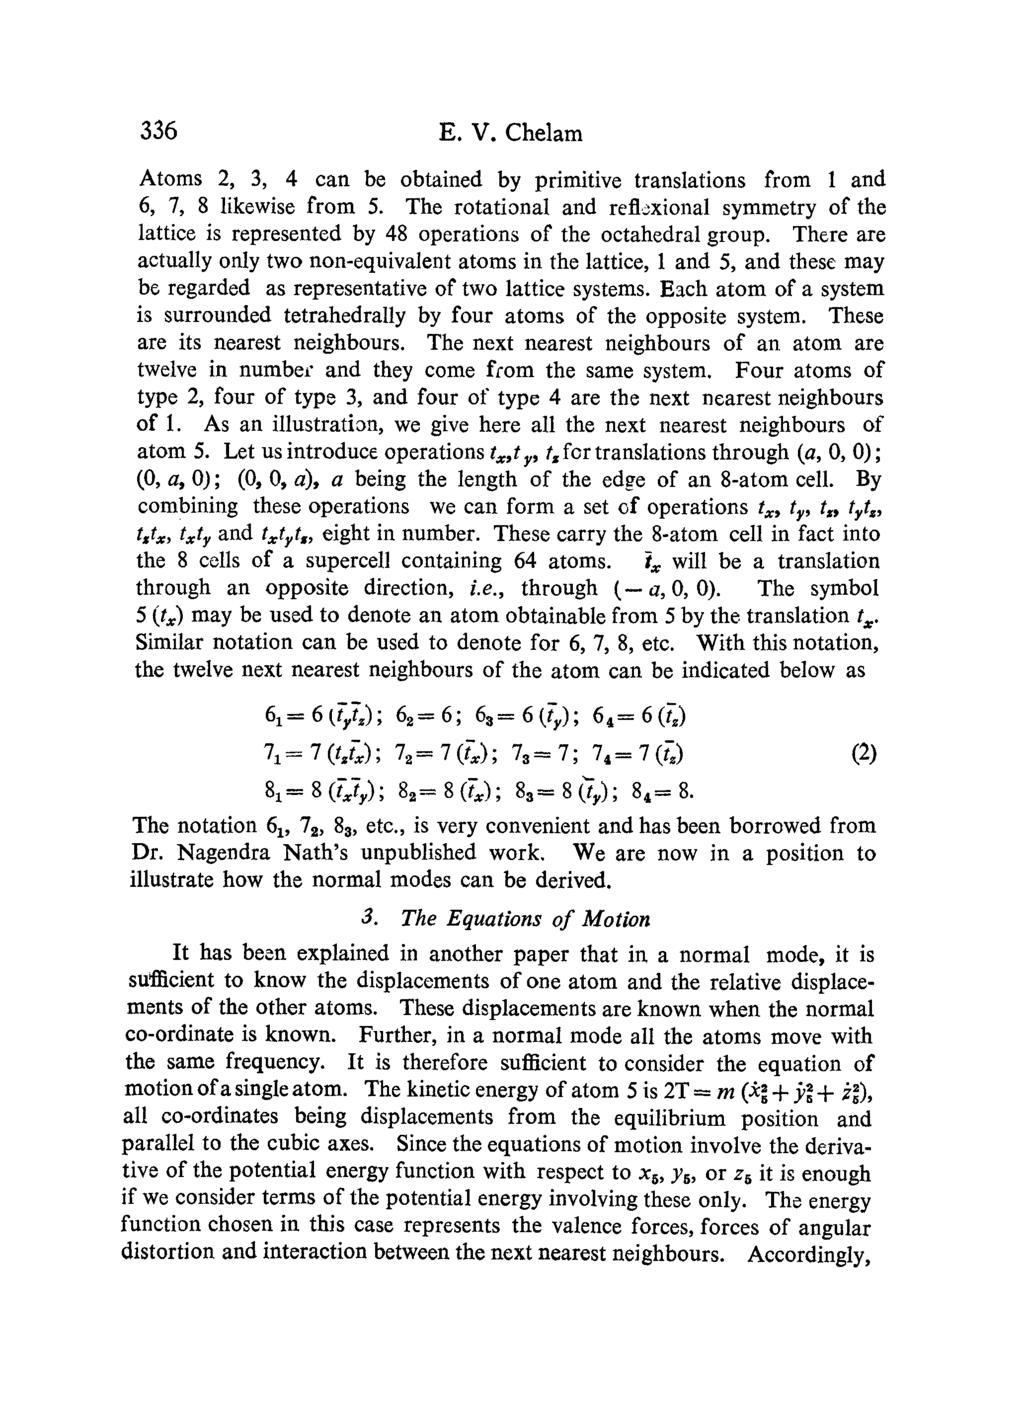 336 E. V. Chelam Atoms 2, 3, 4 can be obtained by primitive translations from 1 and 6, 7, 8 likewise from 5.